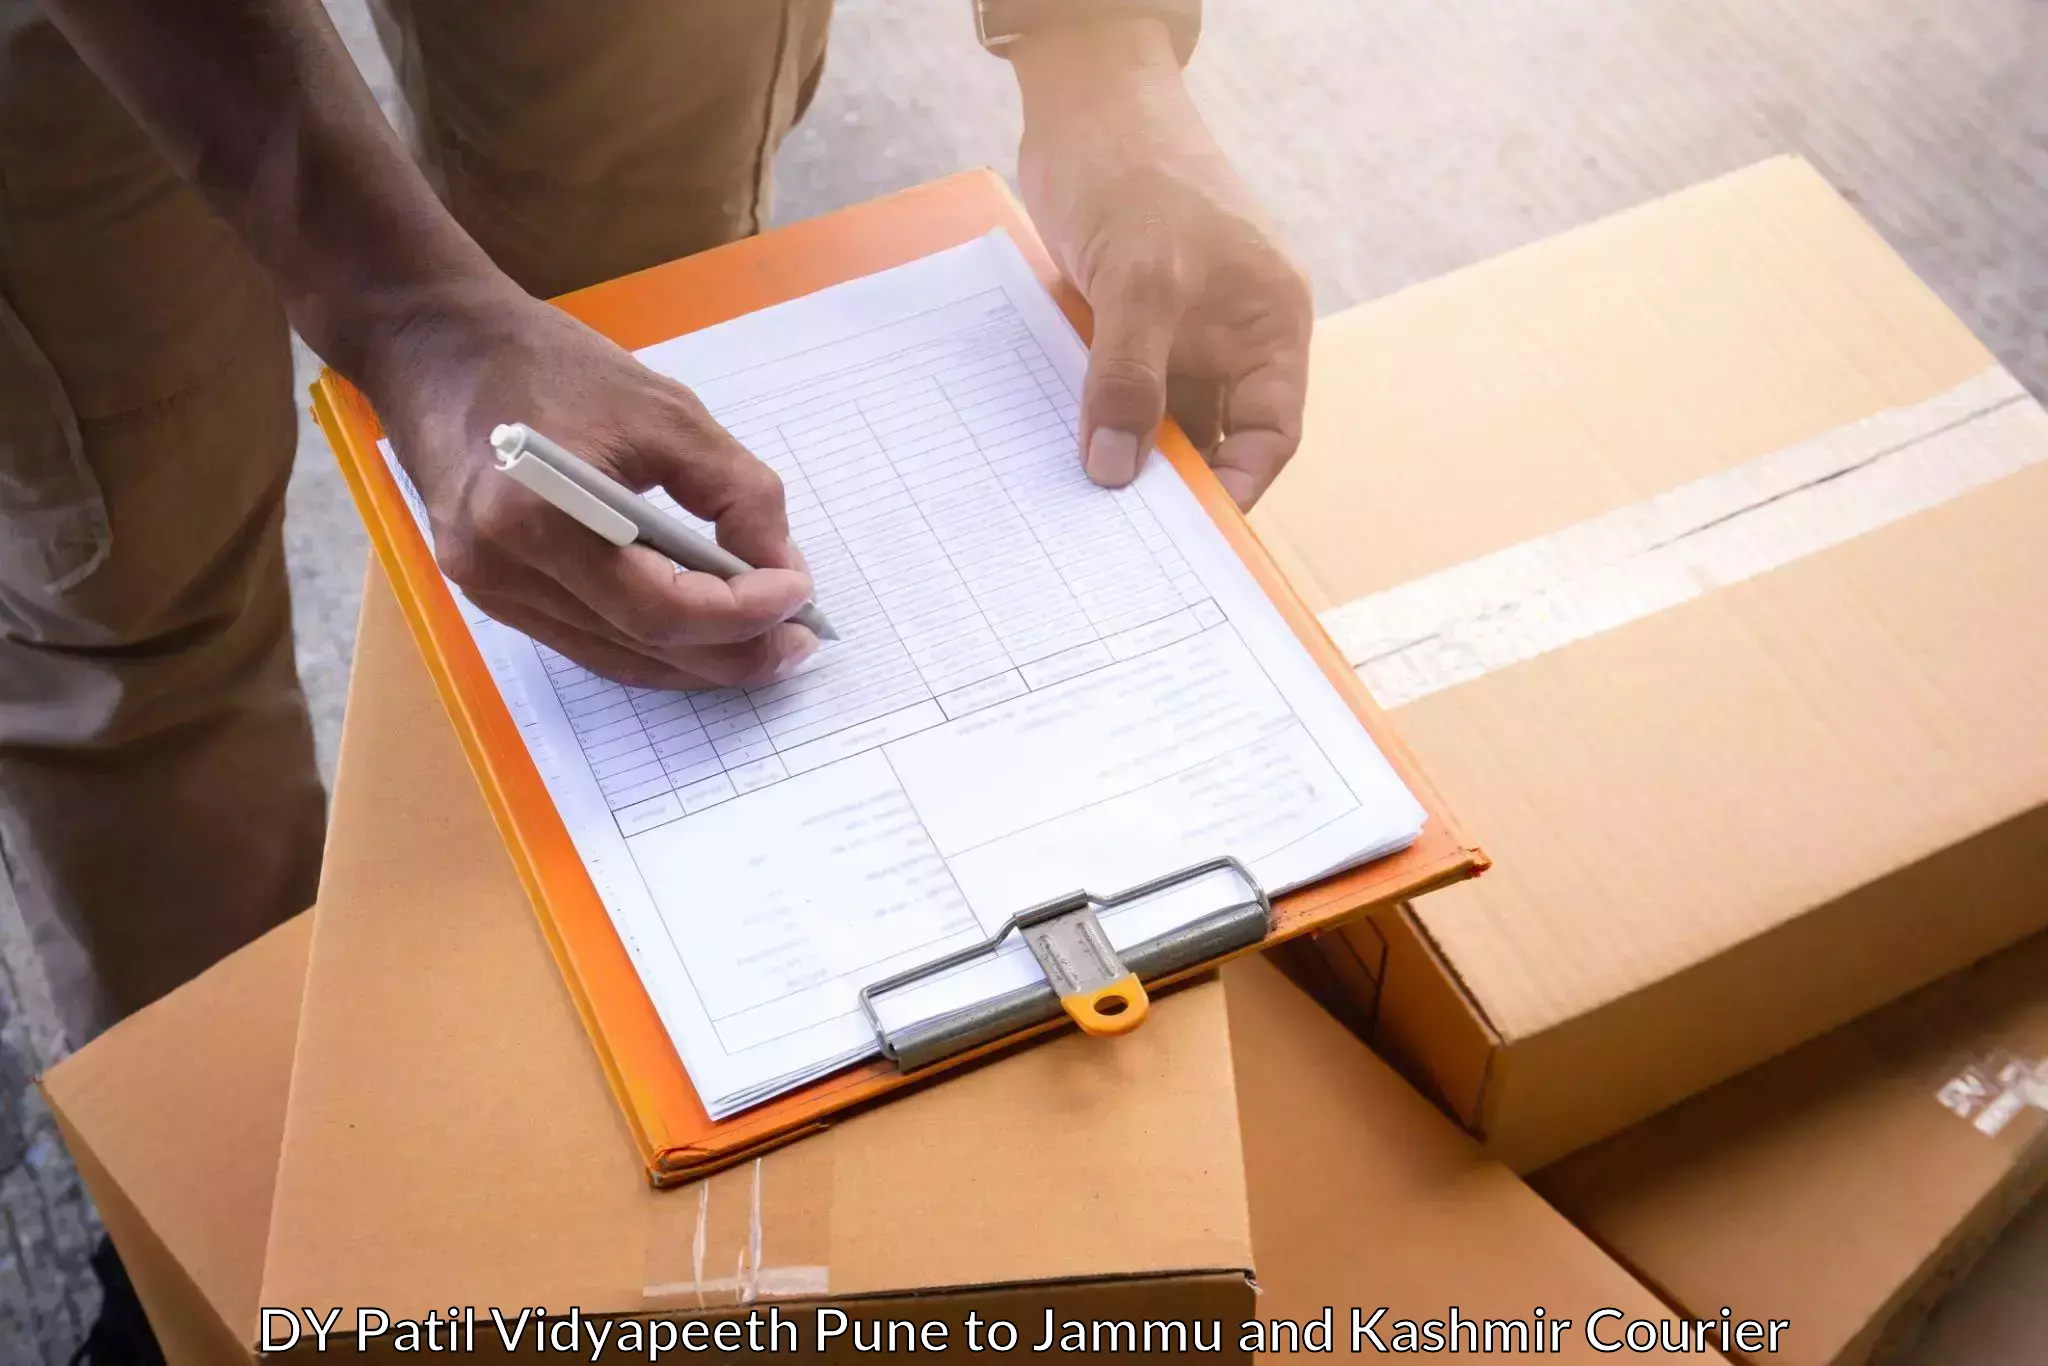 Package consolidation in DY Patil Vidyapeeth Pune to University of Jammu